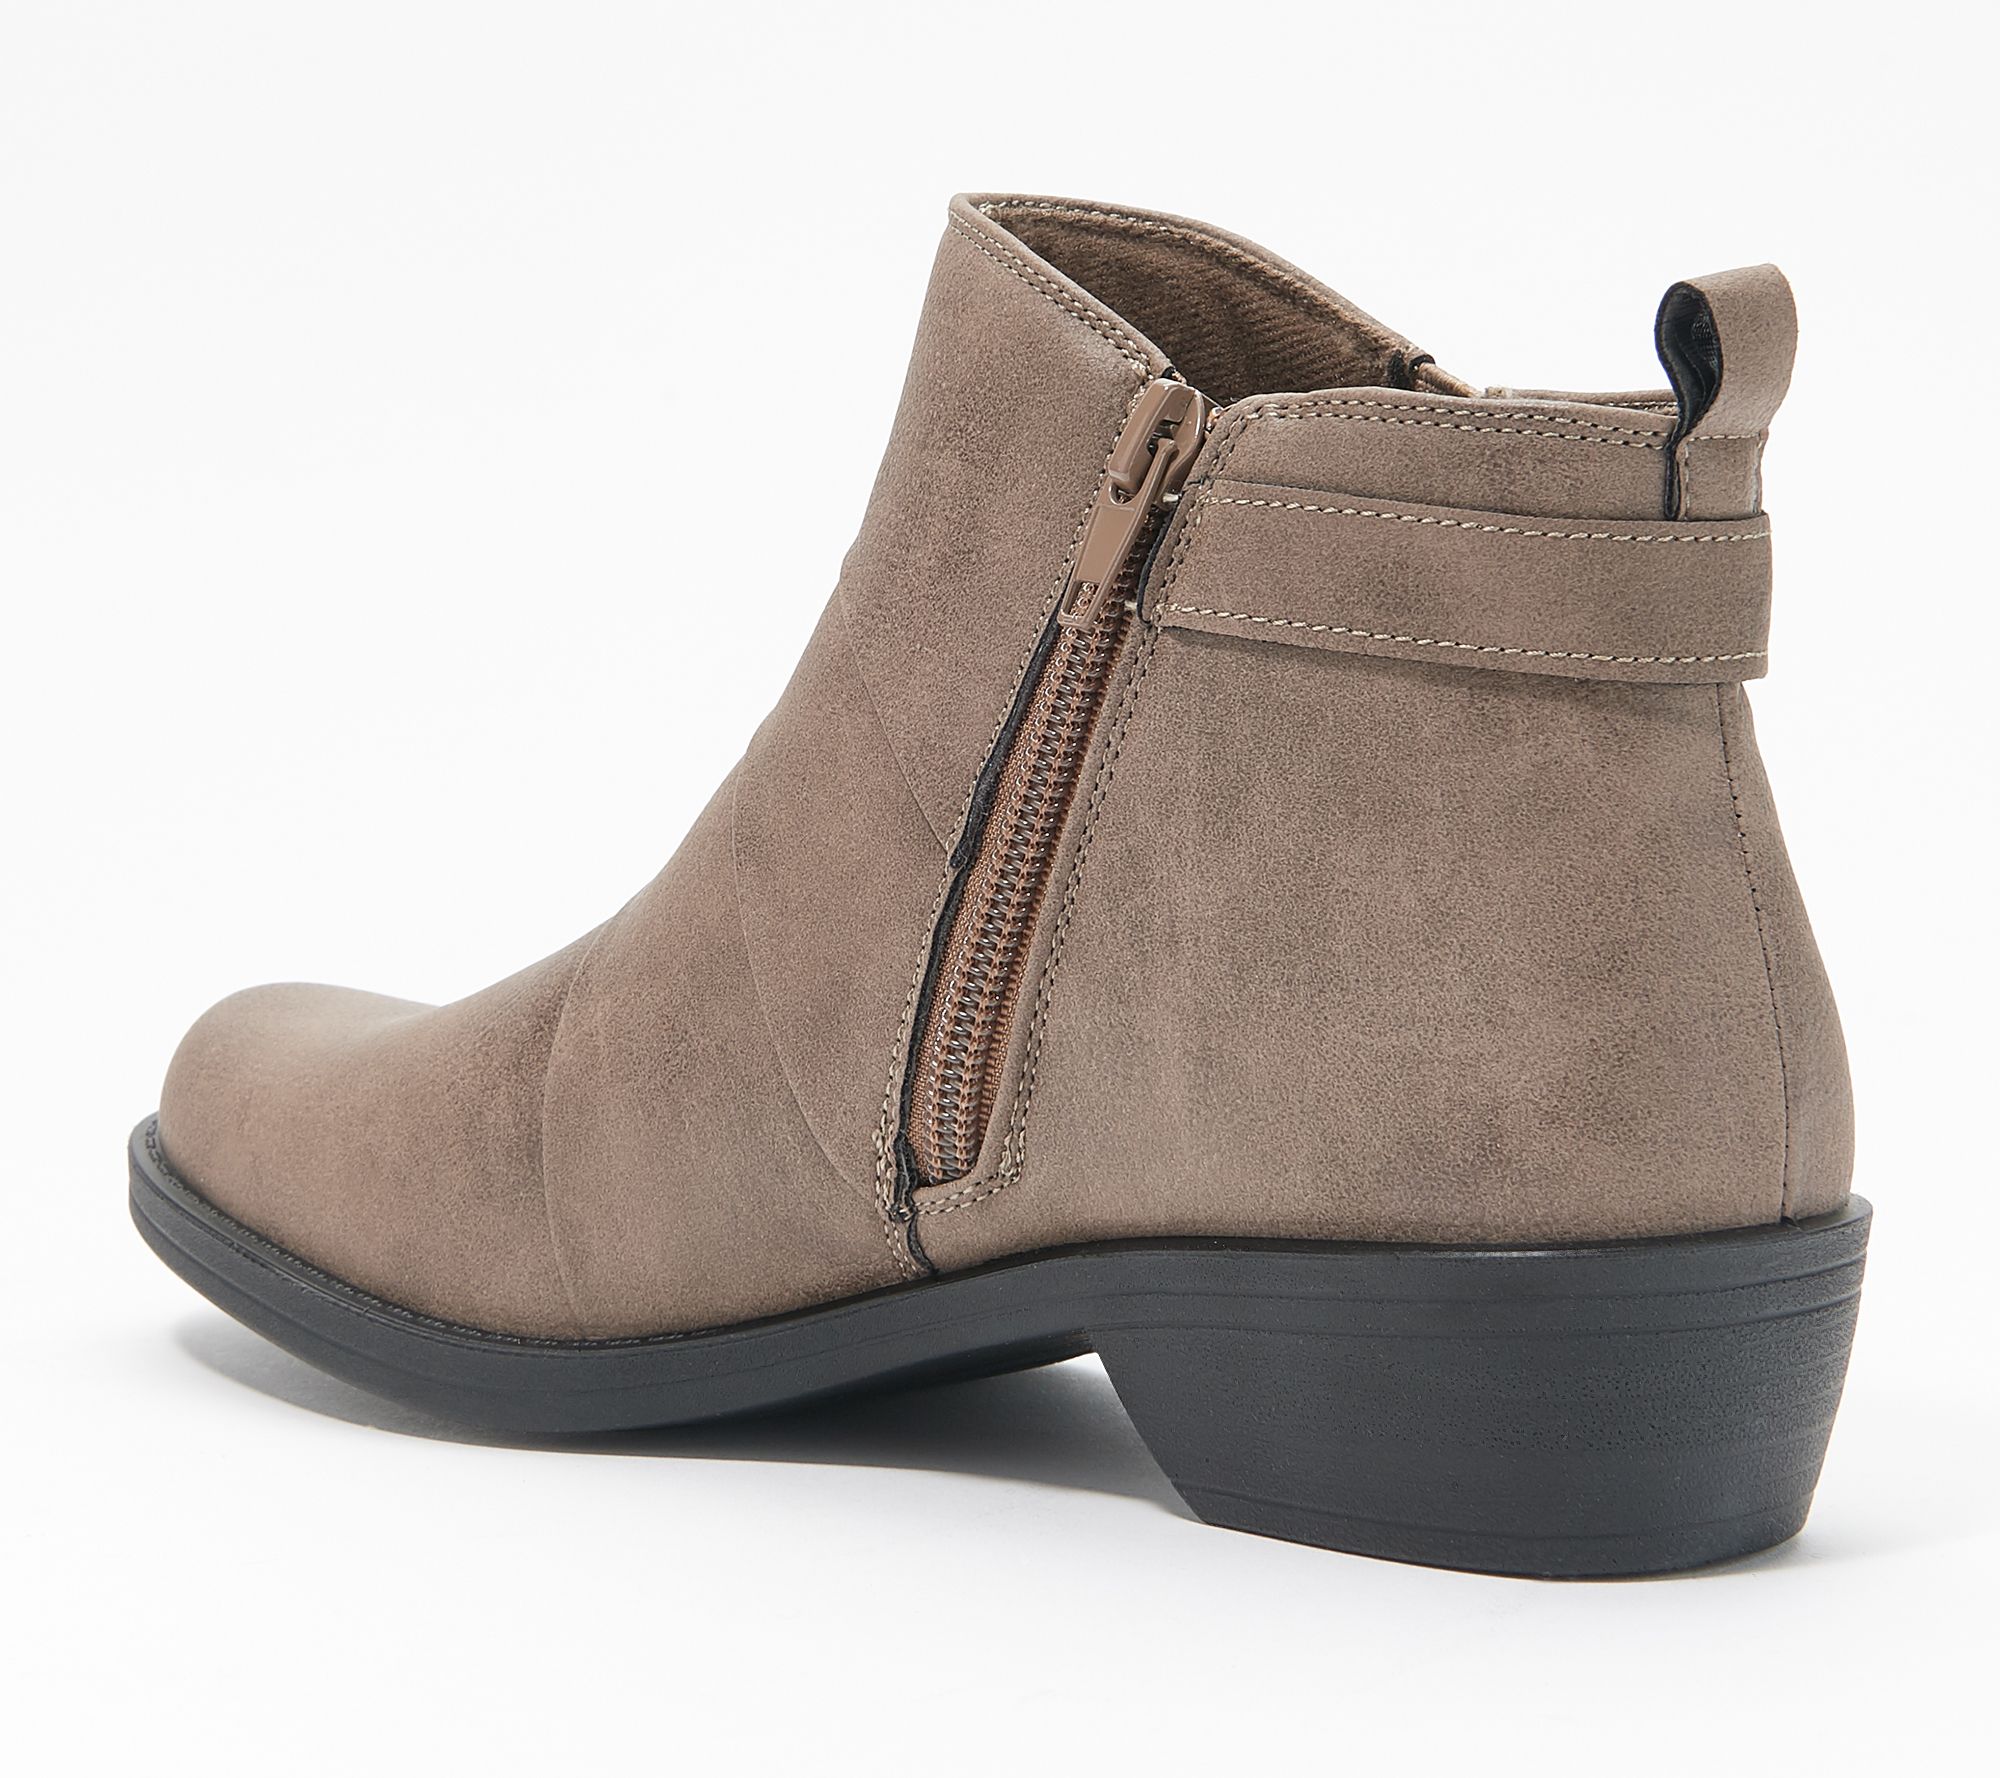 Easy Street Ankle Boots - Shanna - QVC.com